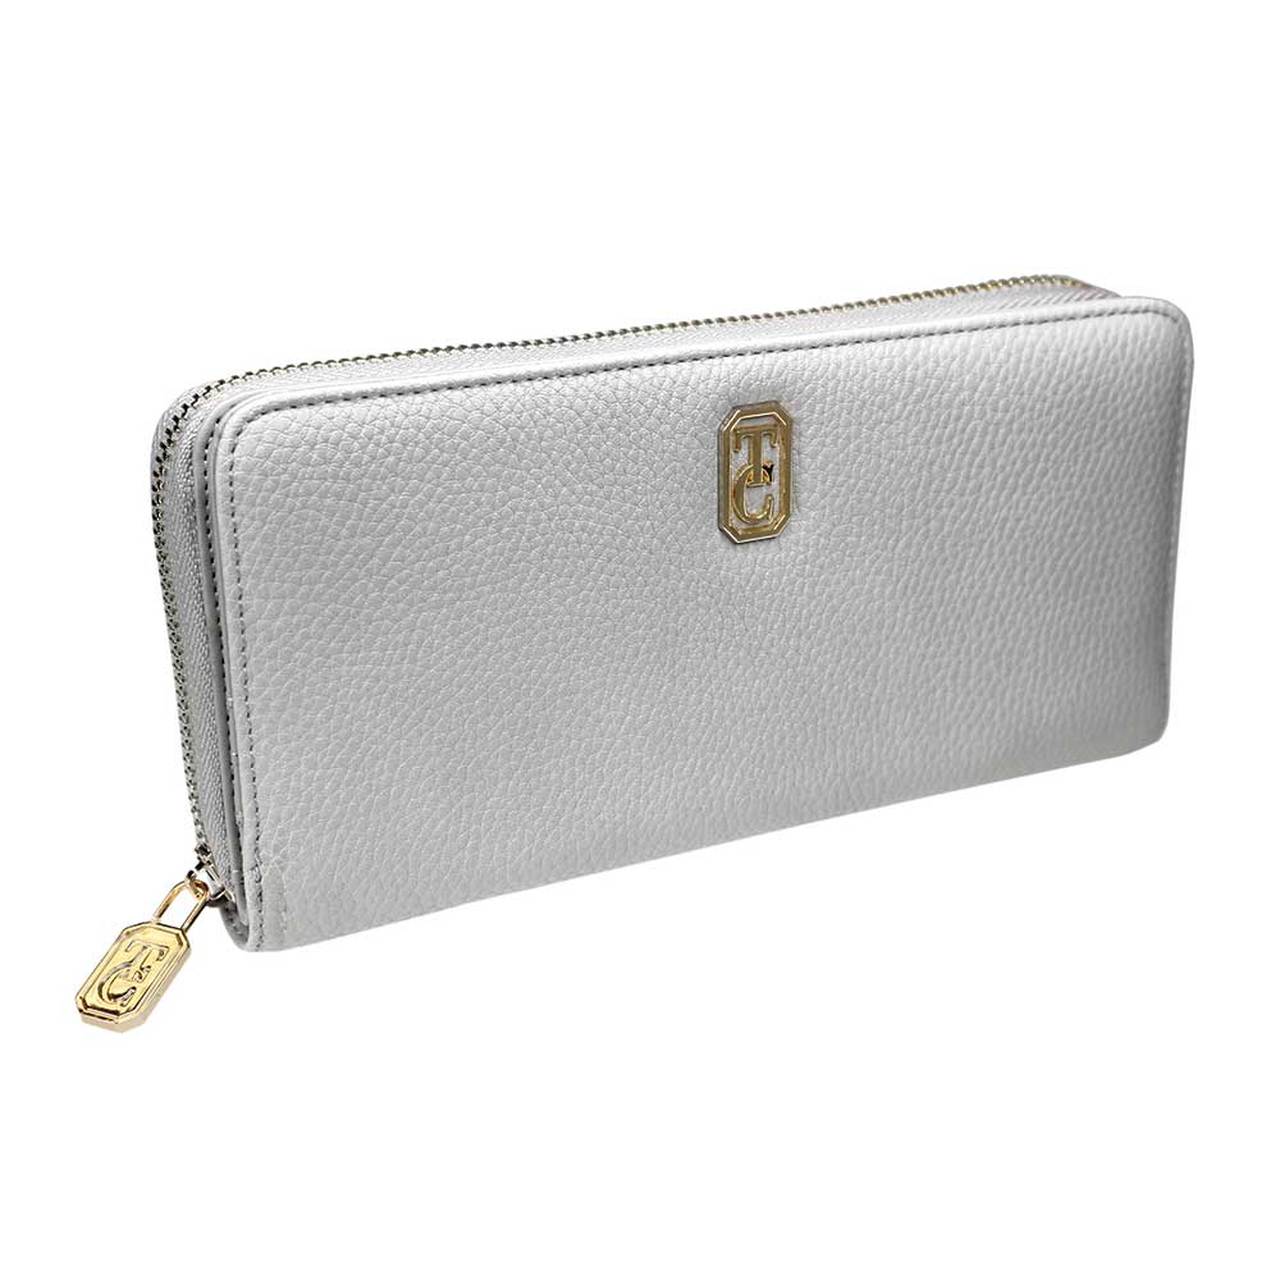 Wallet Umbria - Grey by Tipperary Crystal  Crafted in PU, this sleek case is the ideal all-in-one accessory. A must have when travelling, tuck it into your carry-all for everyday convenience.